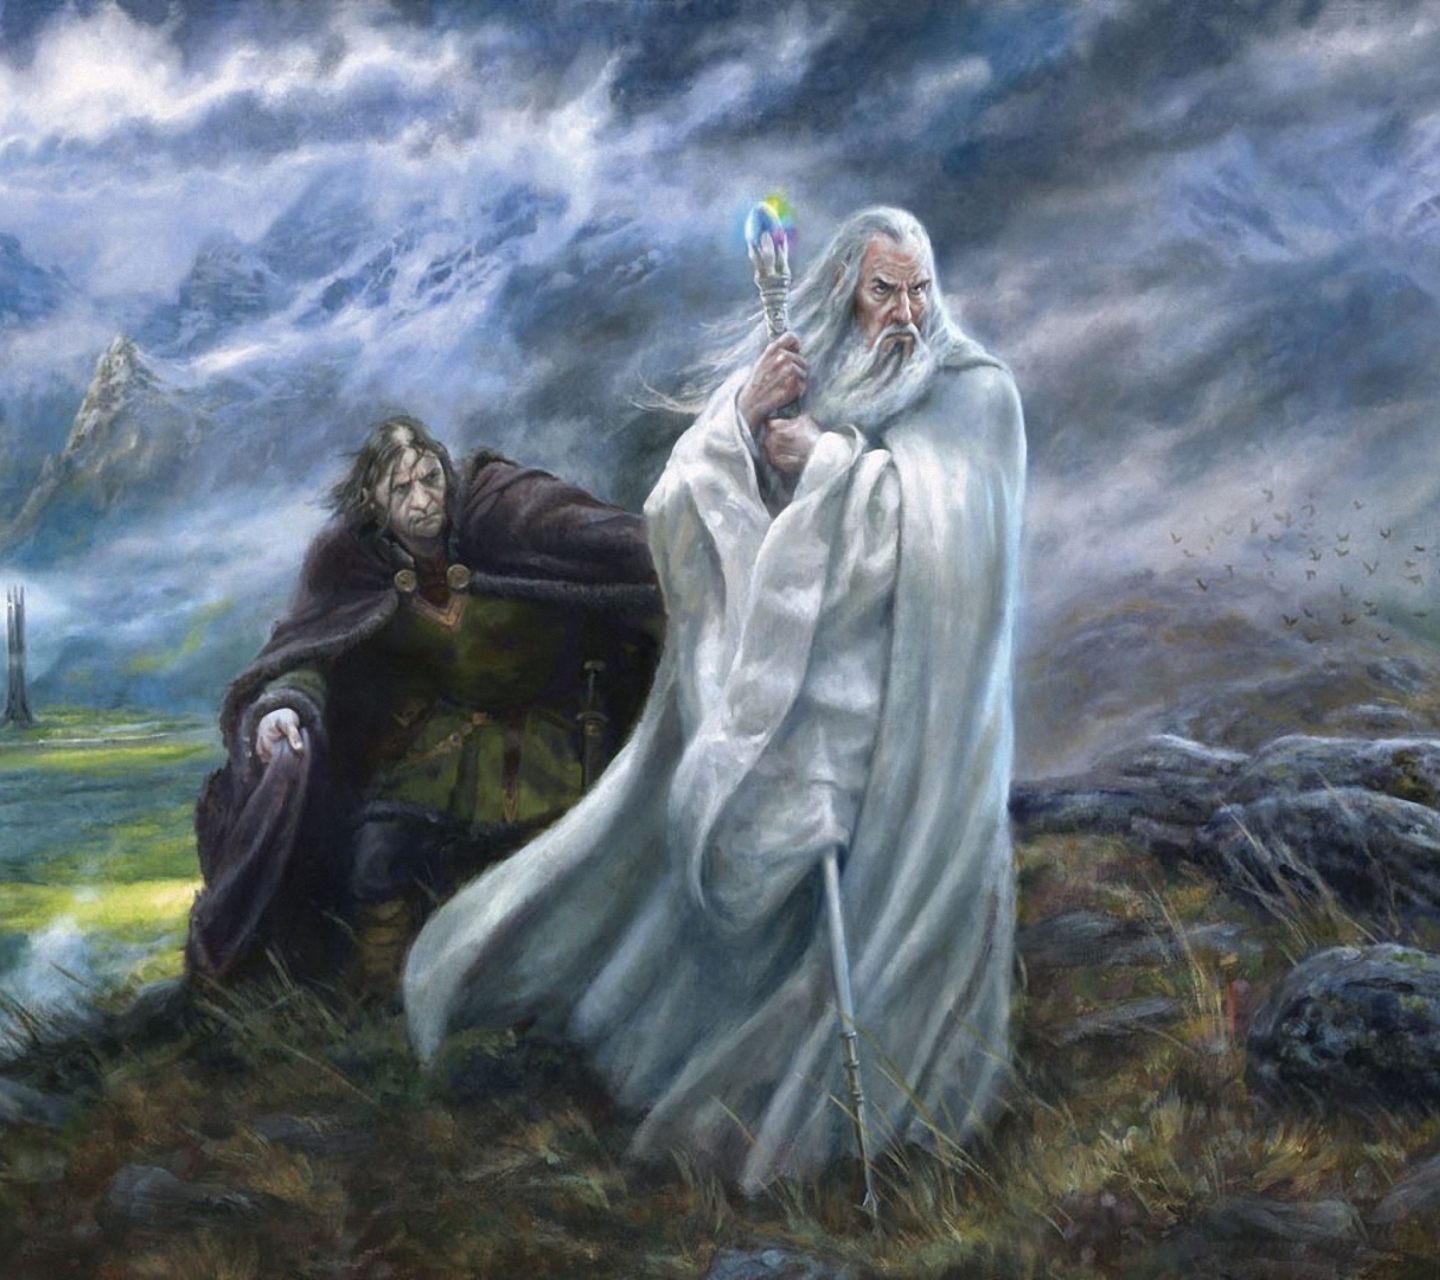 Das Lord of the Rings Art Wallpaper 1440x1280